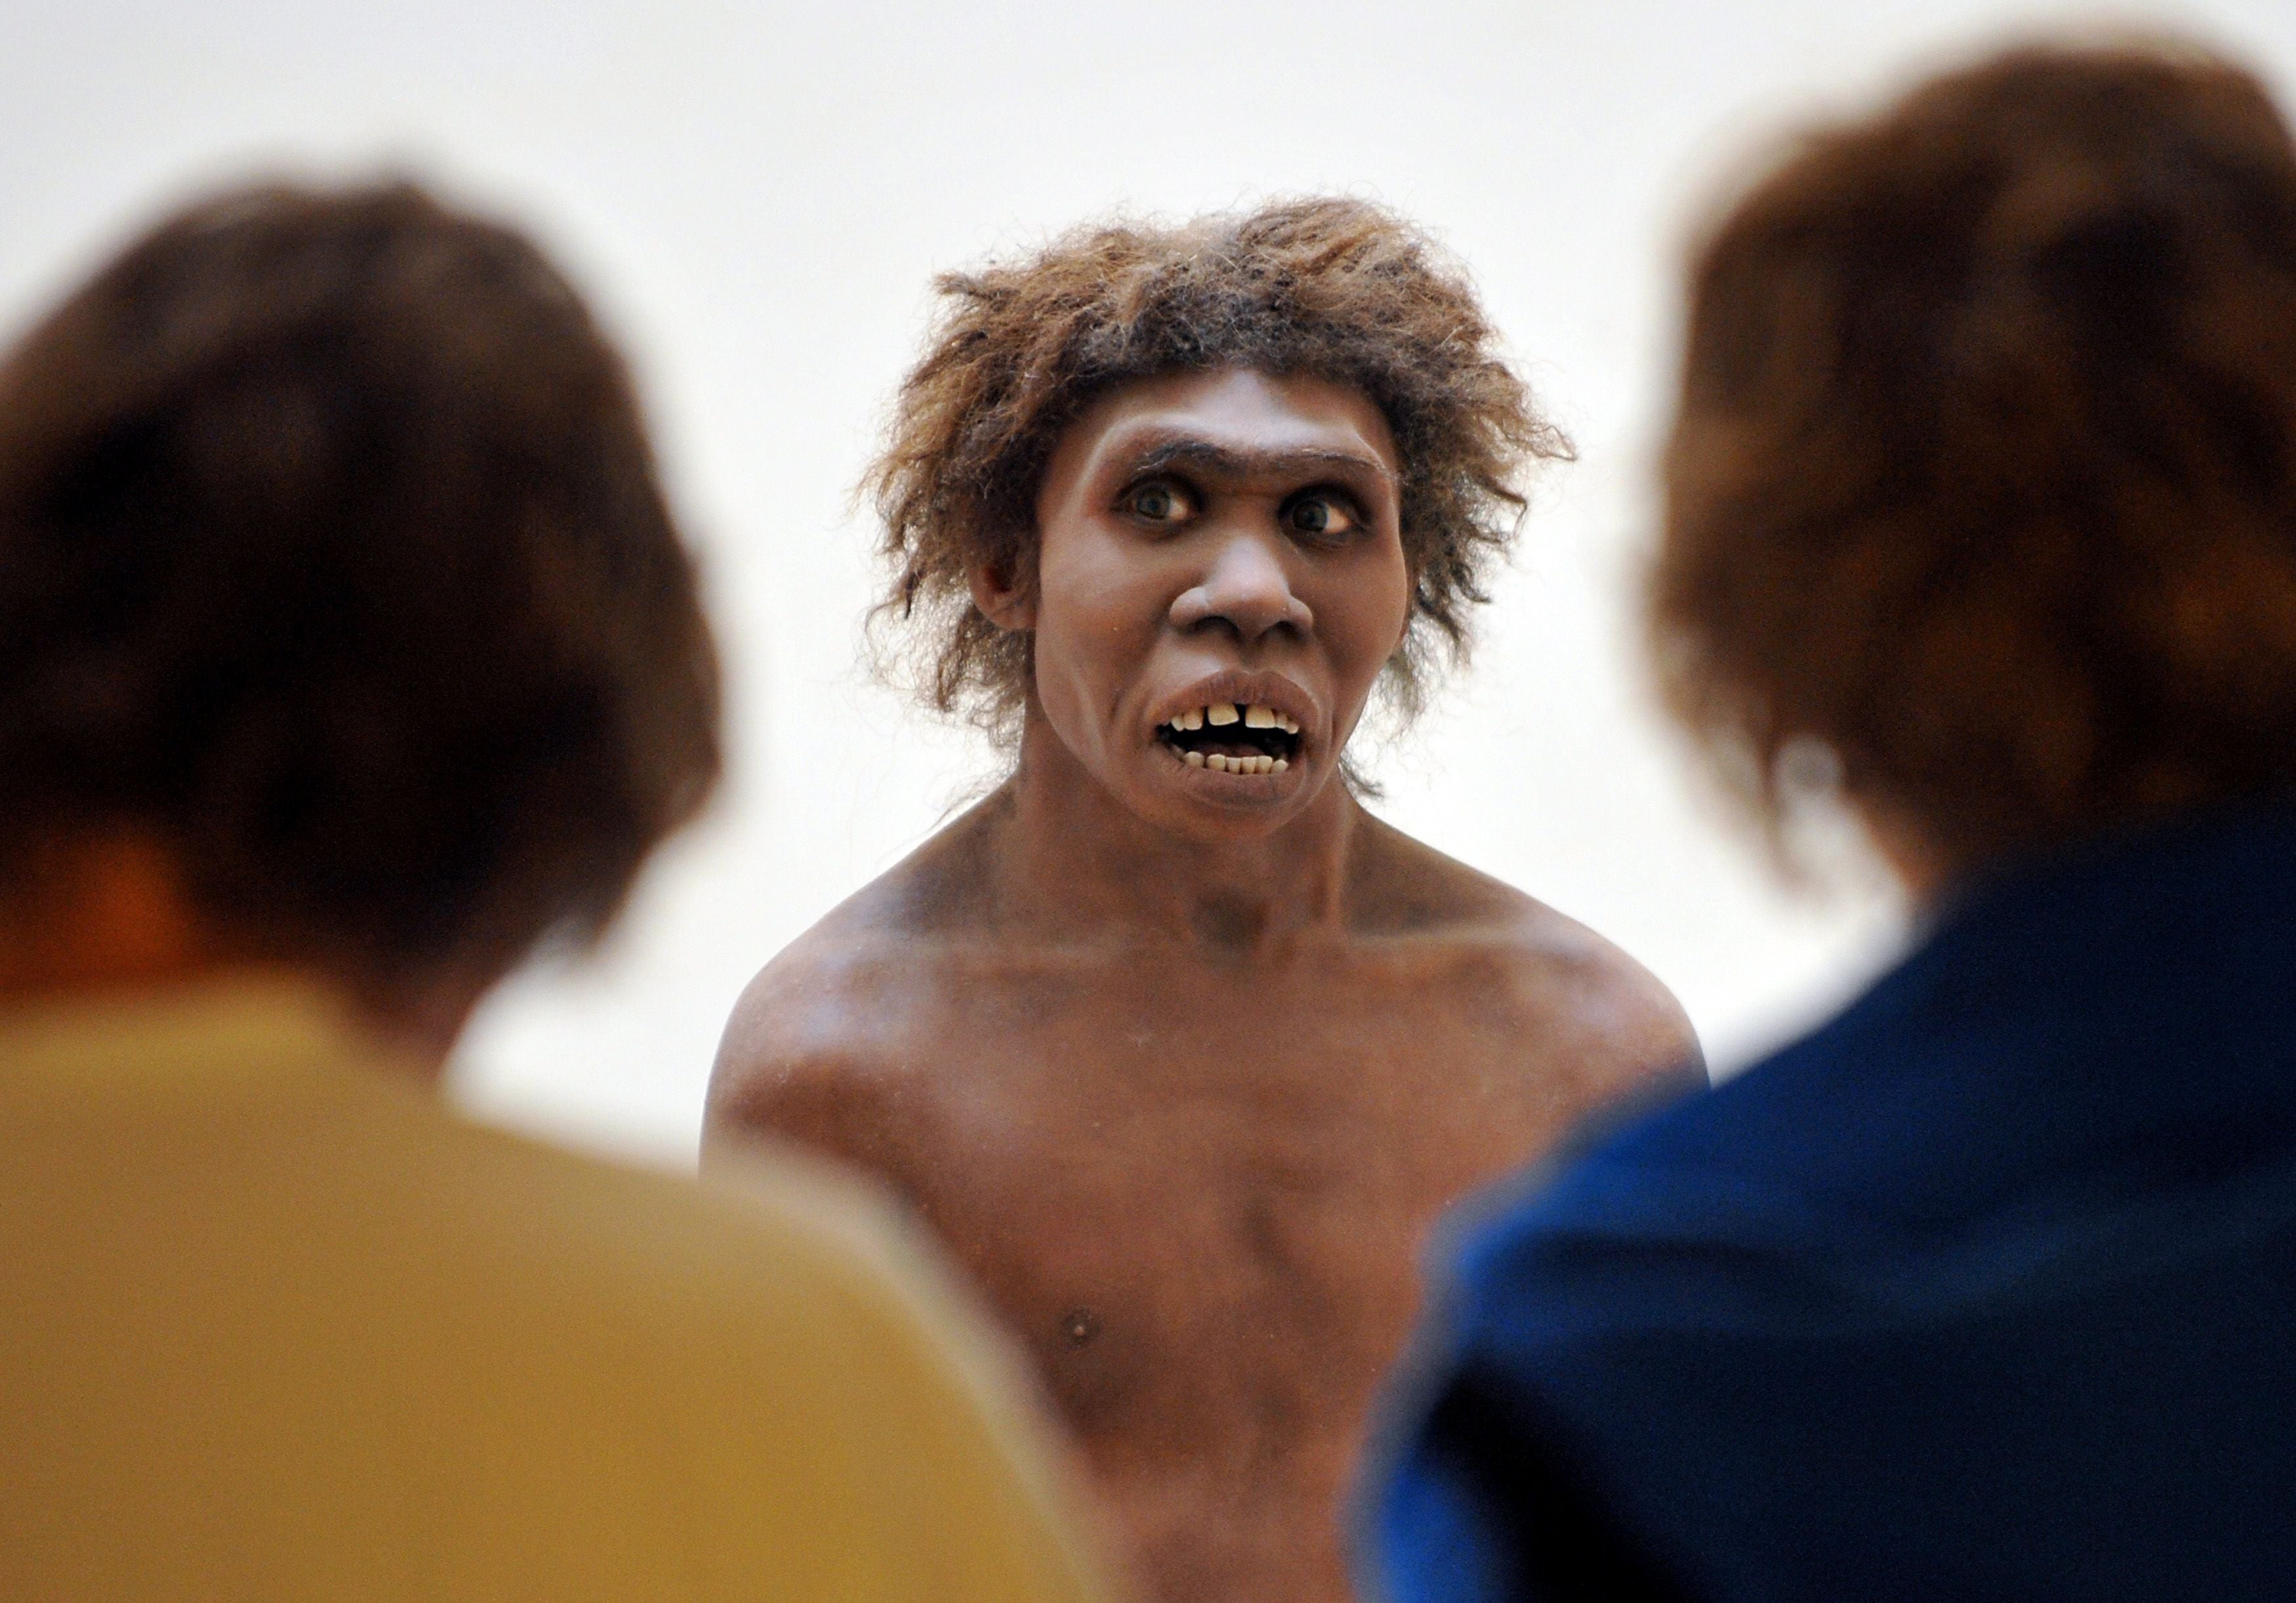 A model representing a Neanderthal man on display at the National Museum of Prehistory in France. Neanderthals had a hearing system as fine as ours, according to a scientific study